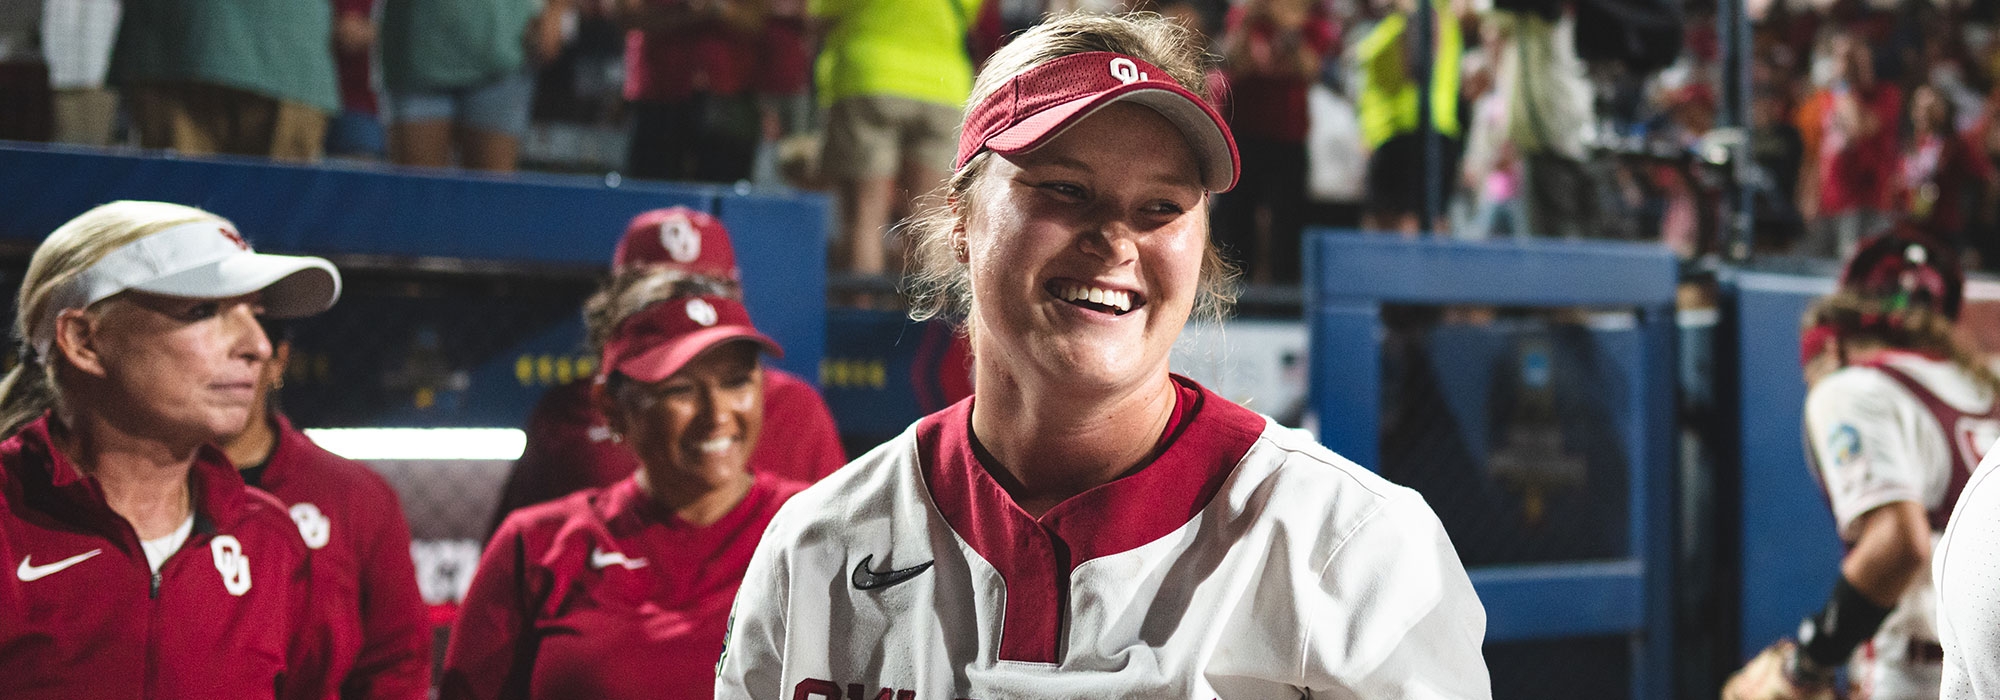 OU softball pitcher Kelly Maxwell smiles during a game.